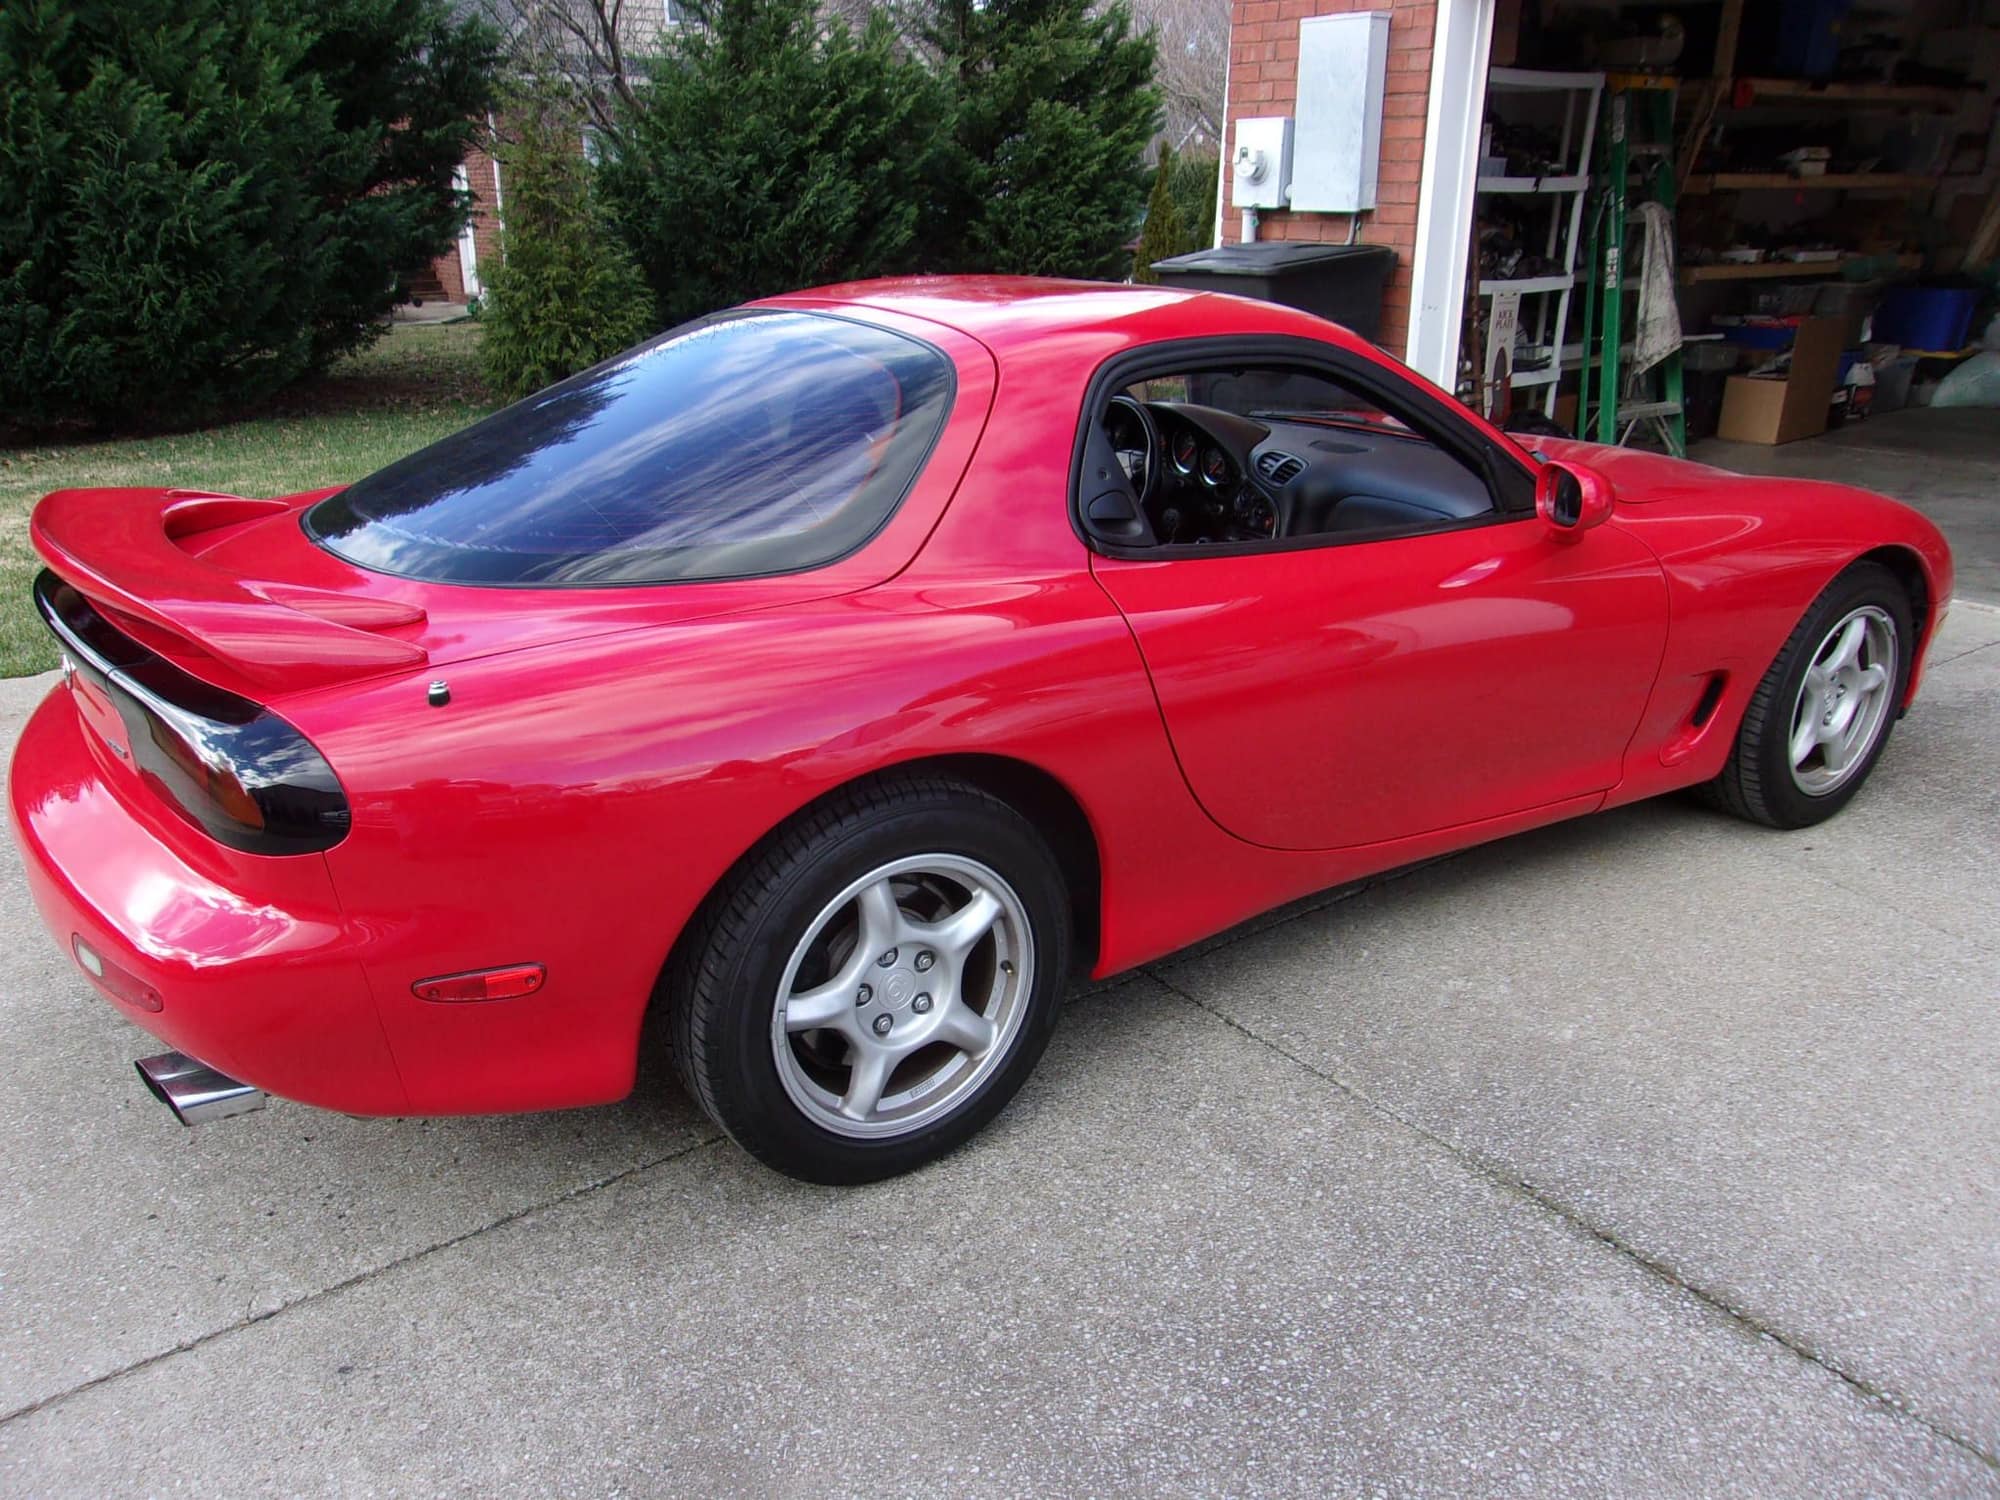 Engine - Complete - Complete Drop-in Engine Trans - Used - 1993 to 1994 Mazda RX-7 - Murfreesboro, TN 37130, United States